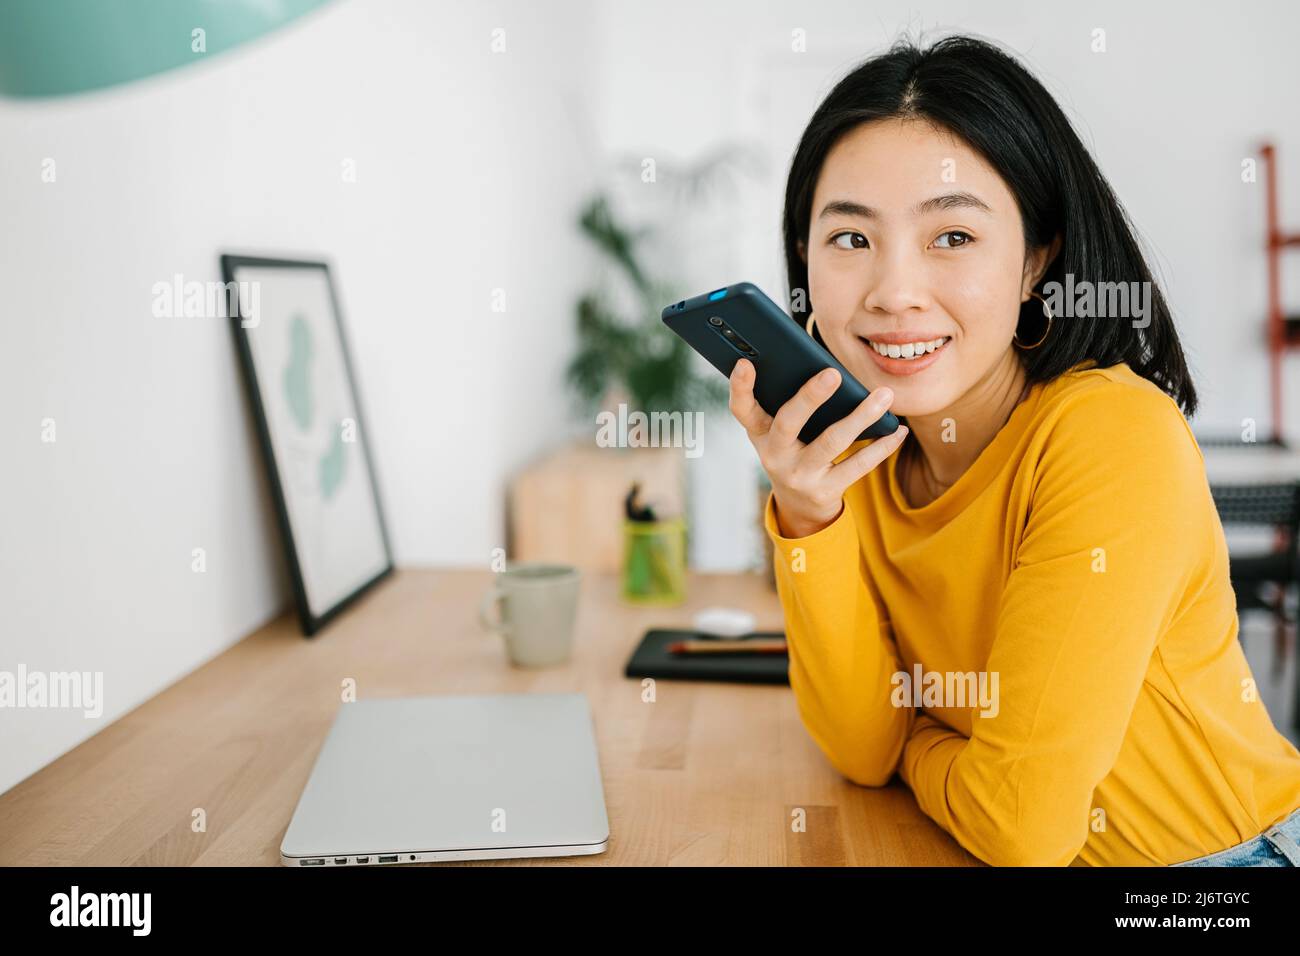 Woman sending a voice message on mobile phone during a break from work at home. Stock Photo